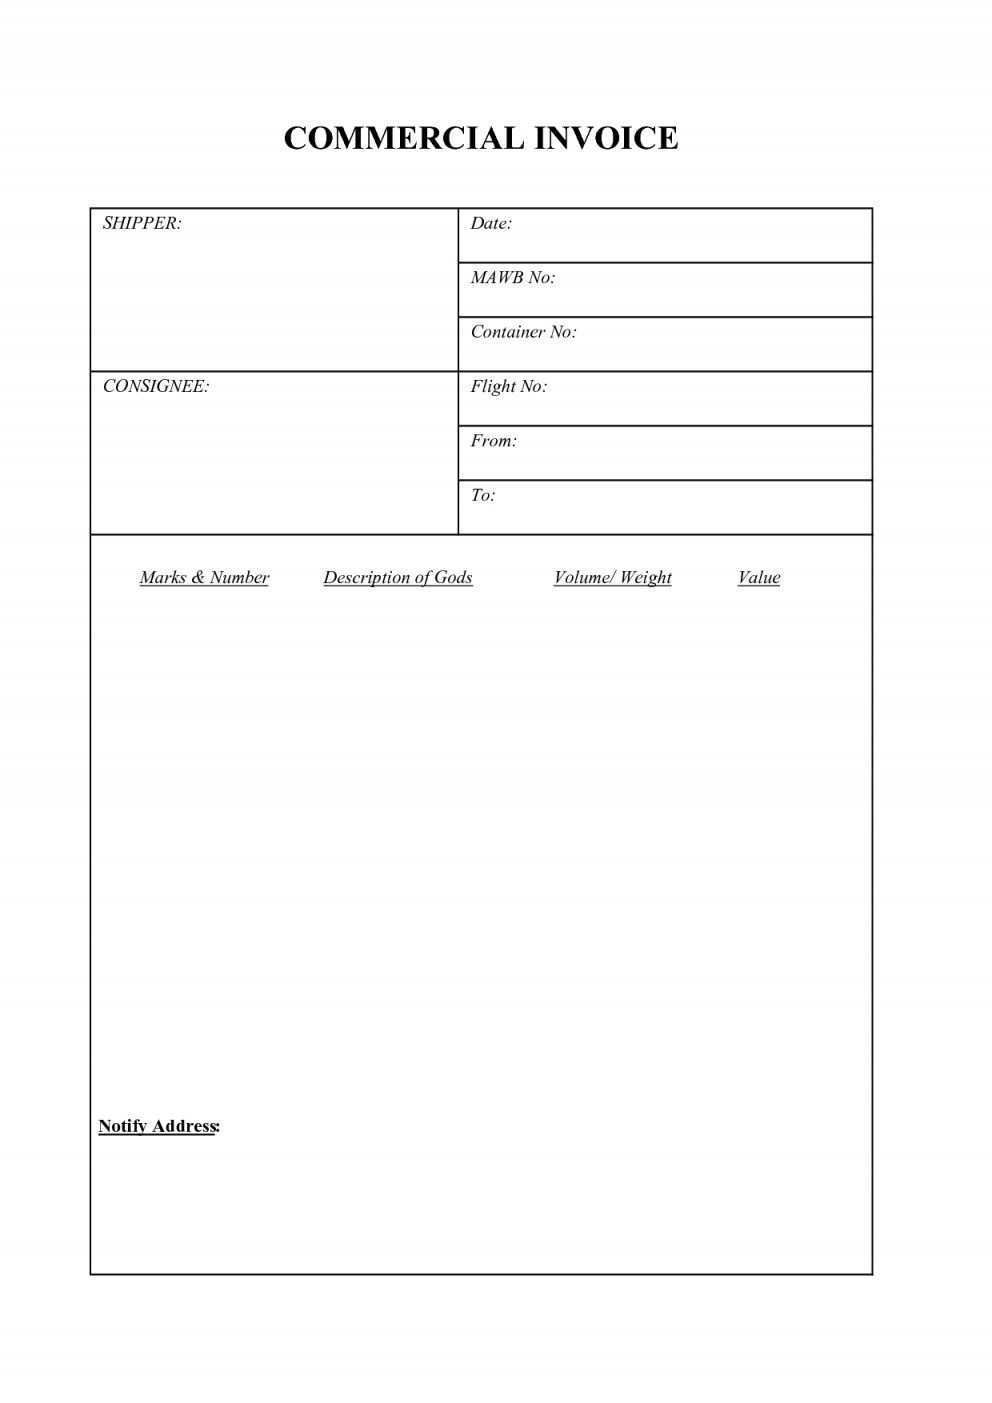 View Commercial Invoice Template Word Images